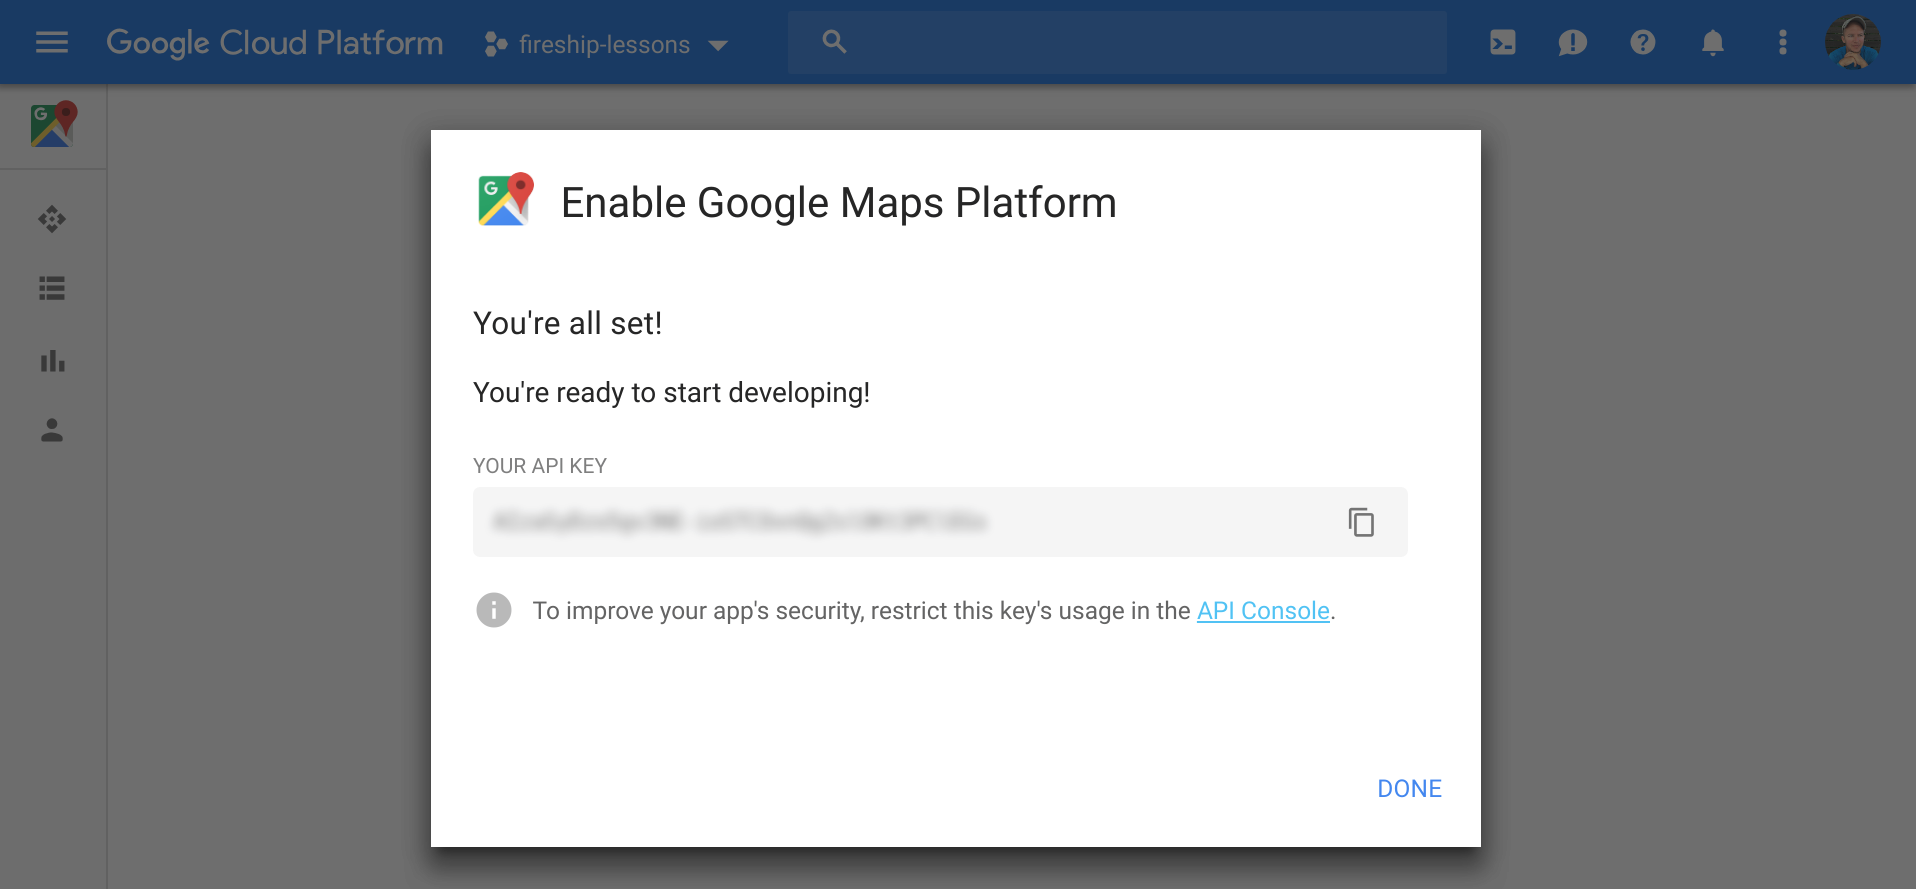 where to get the Google maps API key on the gcp console